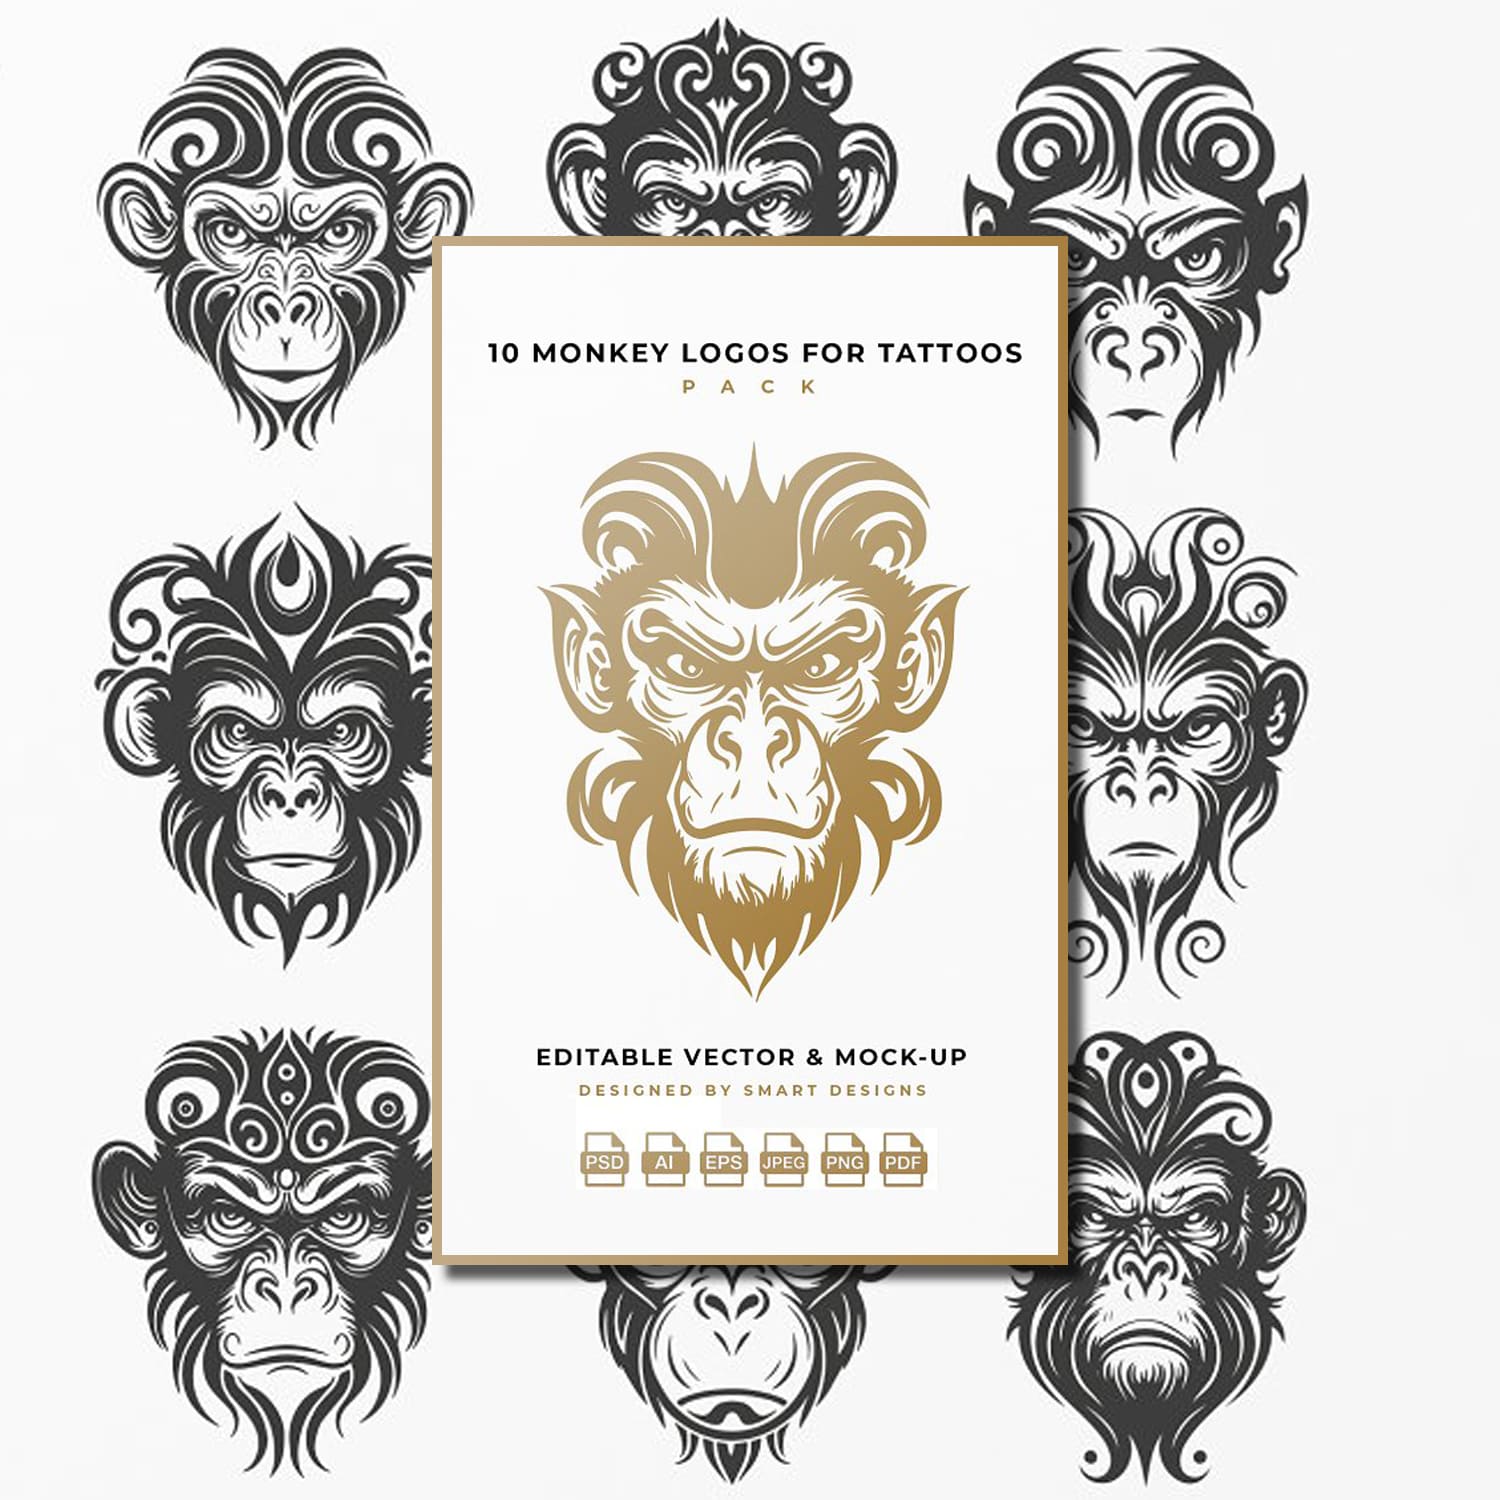 10988203 monkey logos for tattoos pack x10 1500 1500 741